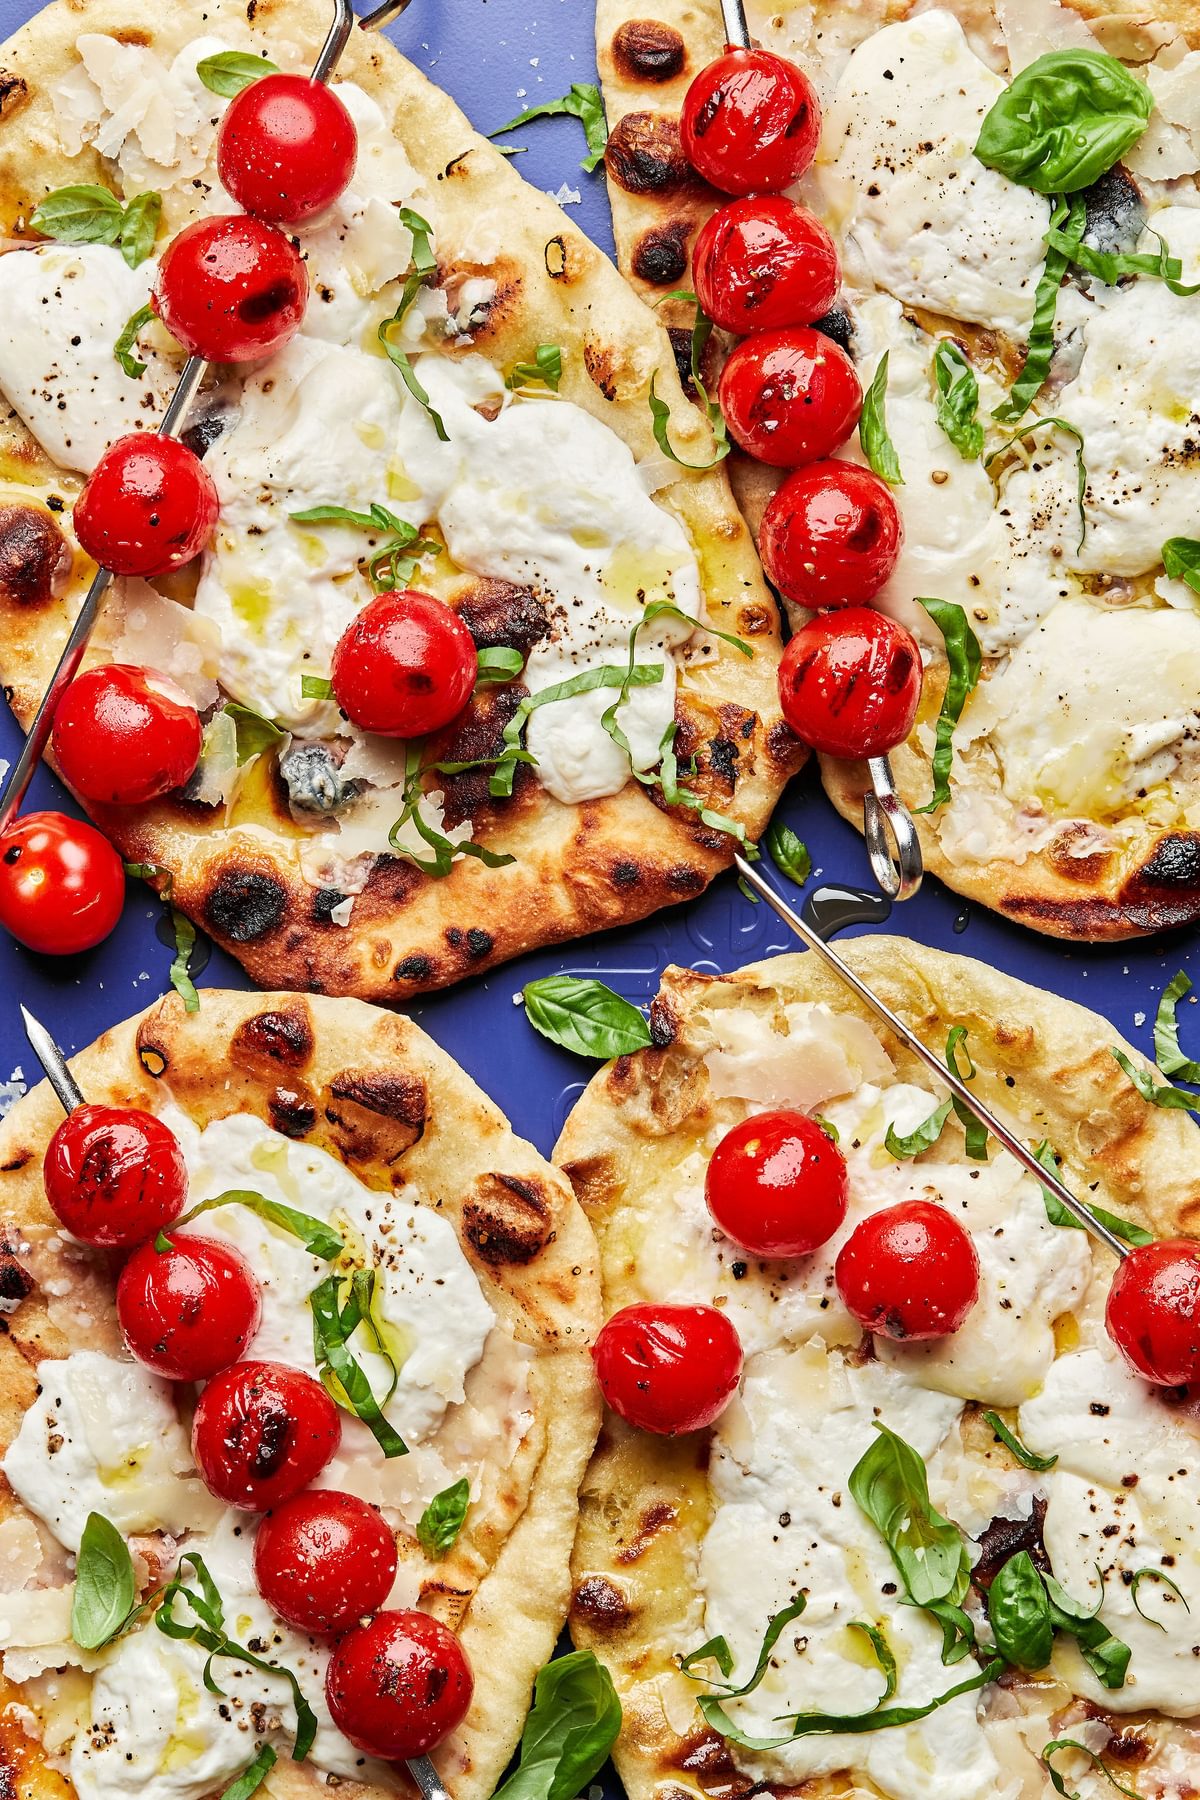 Grilled Flatbread With Burrata Cheese